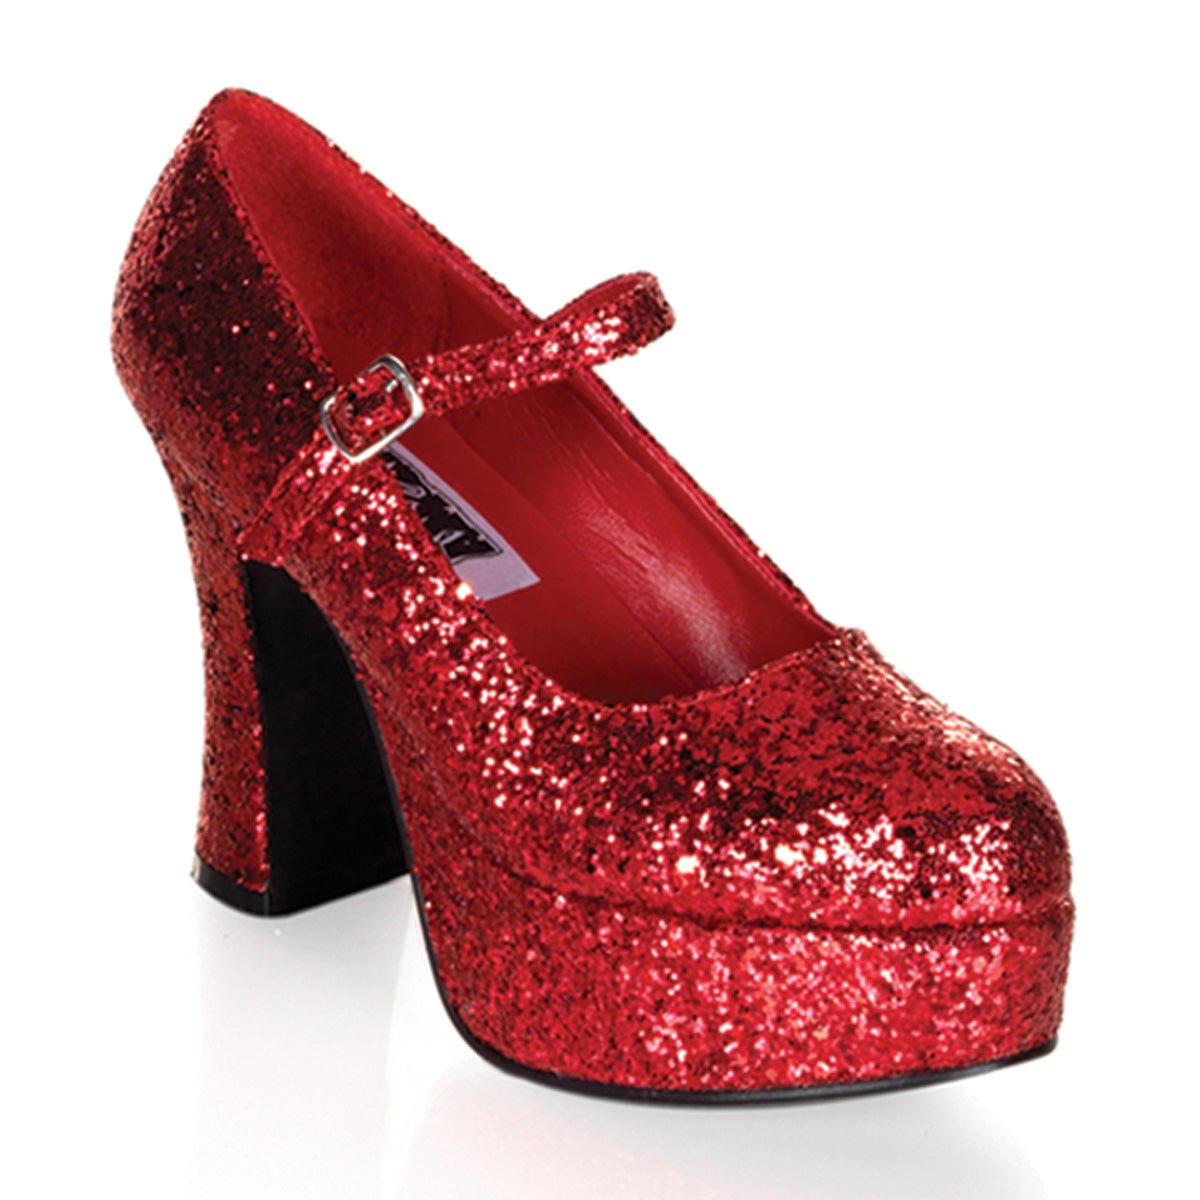 Clearance Funtasma Maryjane 50G Red Size 3UK/6USA - From Clearance Sold By Alternative Footwear